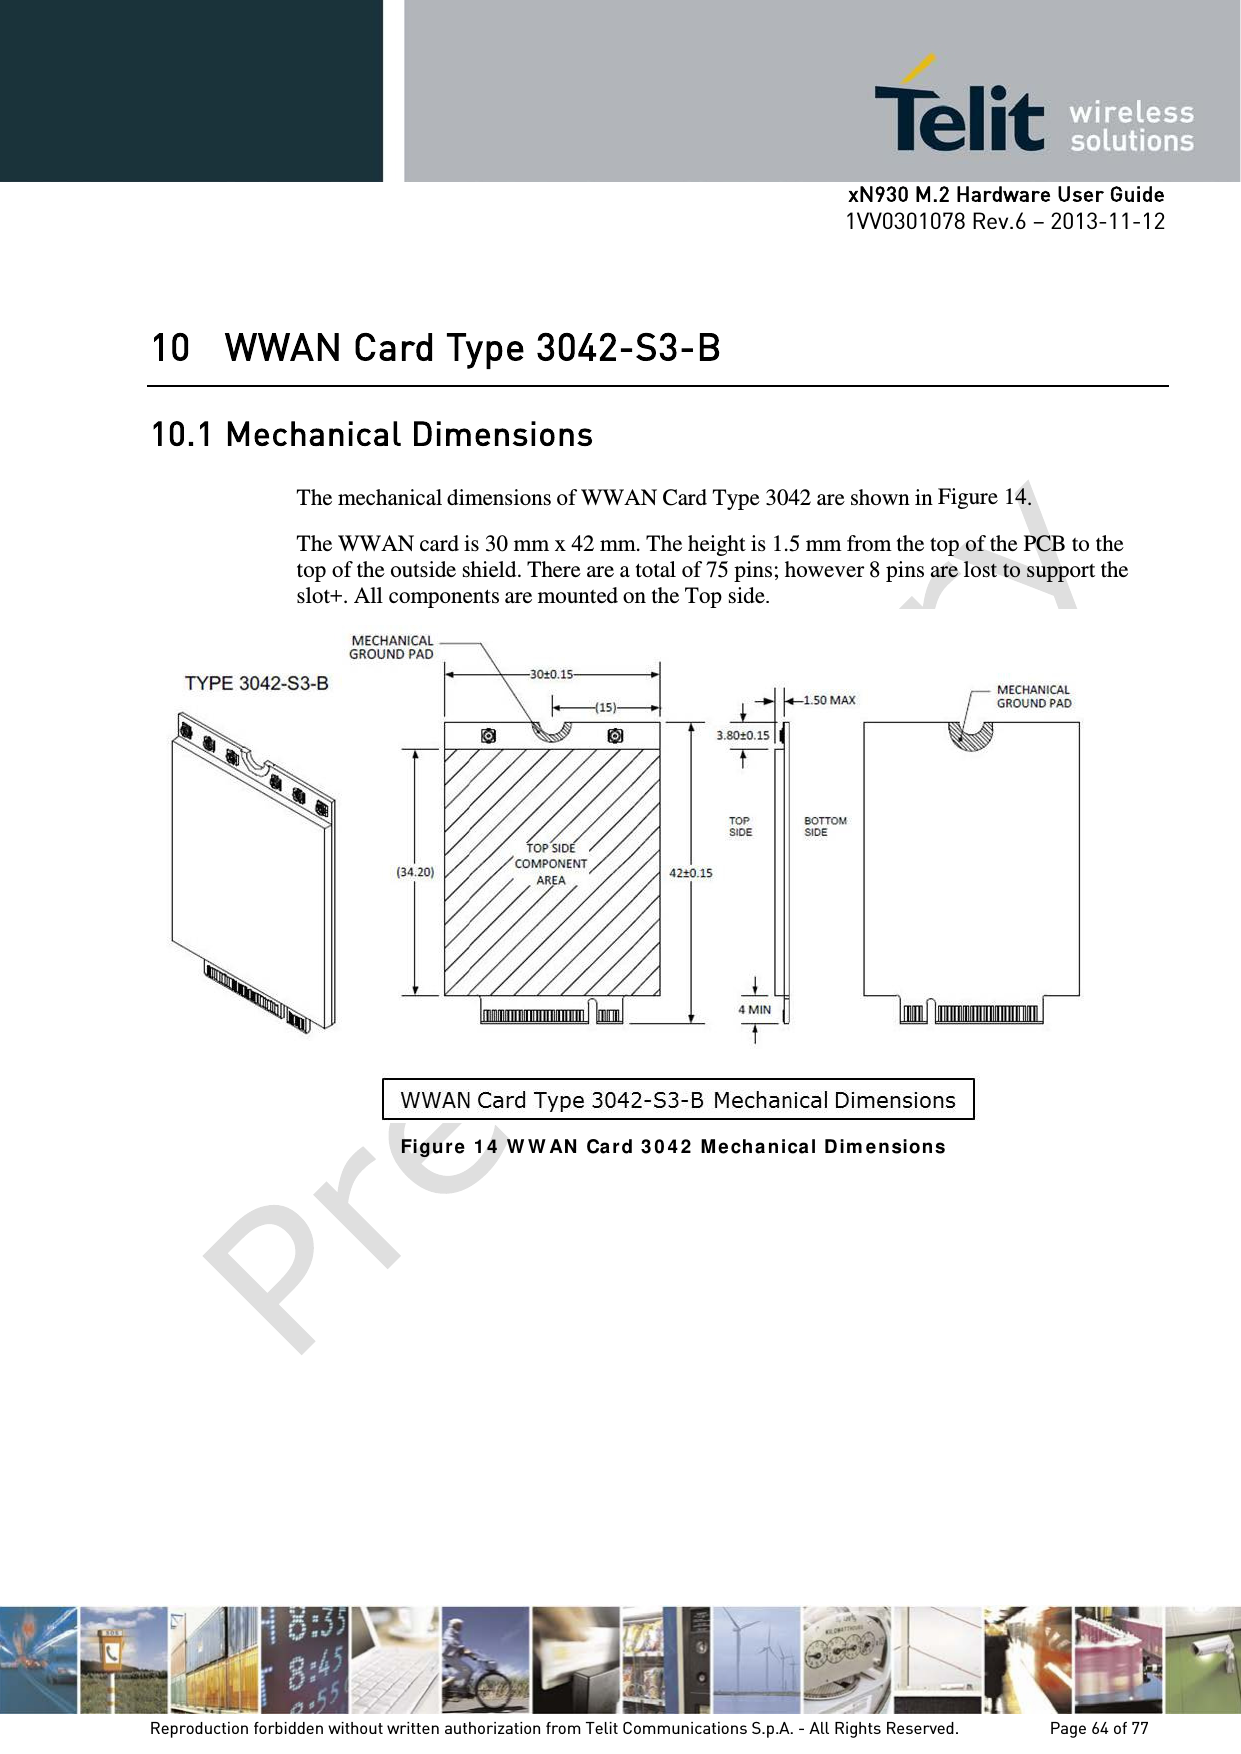      xN930 M.2 Hardware User Guide 1VV0301078 Rev.6 – 2013-11-12    10 WWAN Card Type 3042-S3-B 10.1 Mechanical Dimensions  The mechanical dimensions of WWAN Card Type 3042 are shown in  Figure 14.  The WWAN card is 30 mm x 42 mm. The height is 1.5 mm from the top of the PCB to the top of the outside shield. There are a total of 75 pins; however 8 pins are lost to support the slot+. All components are mounted on the Top side.  Figur e 1 4  W W AN  Ca rd 3 0 4 2  M echa nica l Dim e nsion s    Reproduction forbidden without written authorization from Telit Communications S.p.A. - All Rights Reserved.    Page 64 of 77 